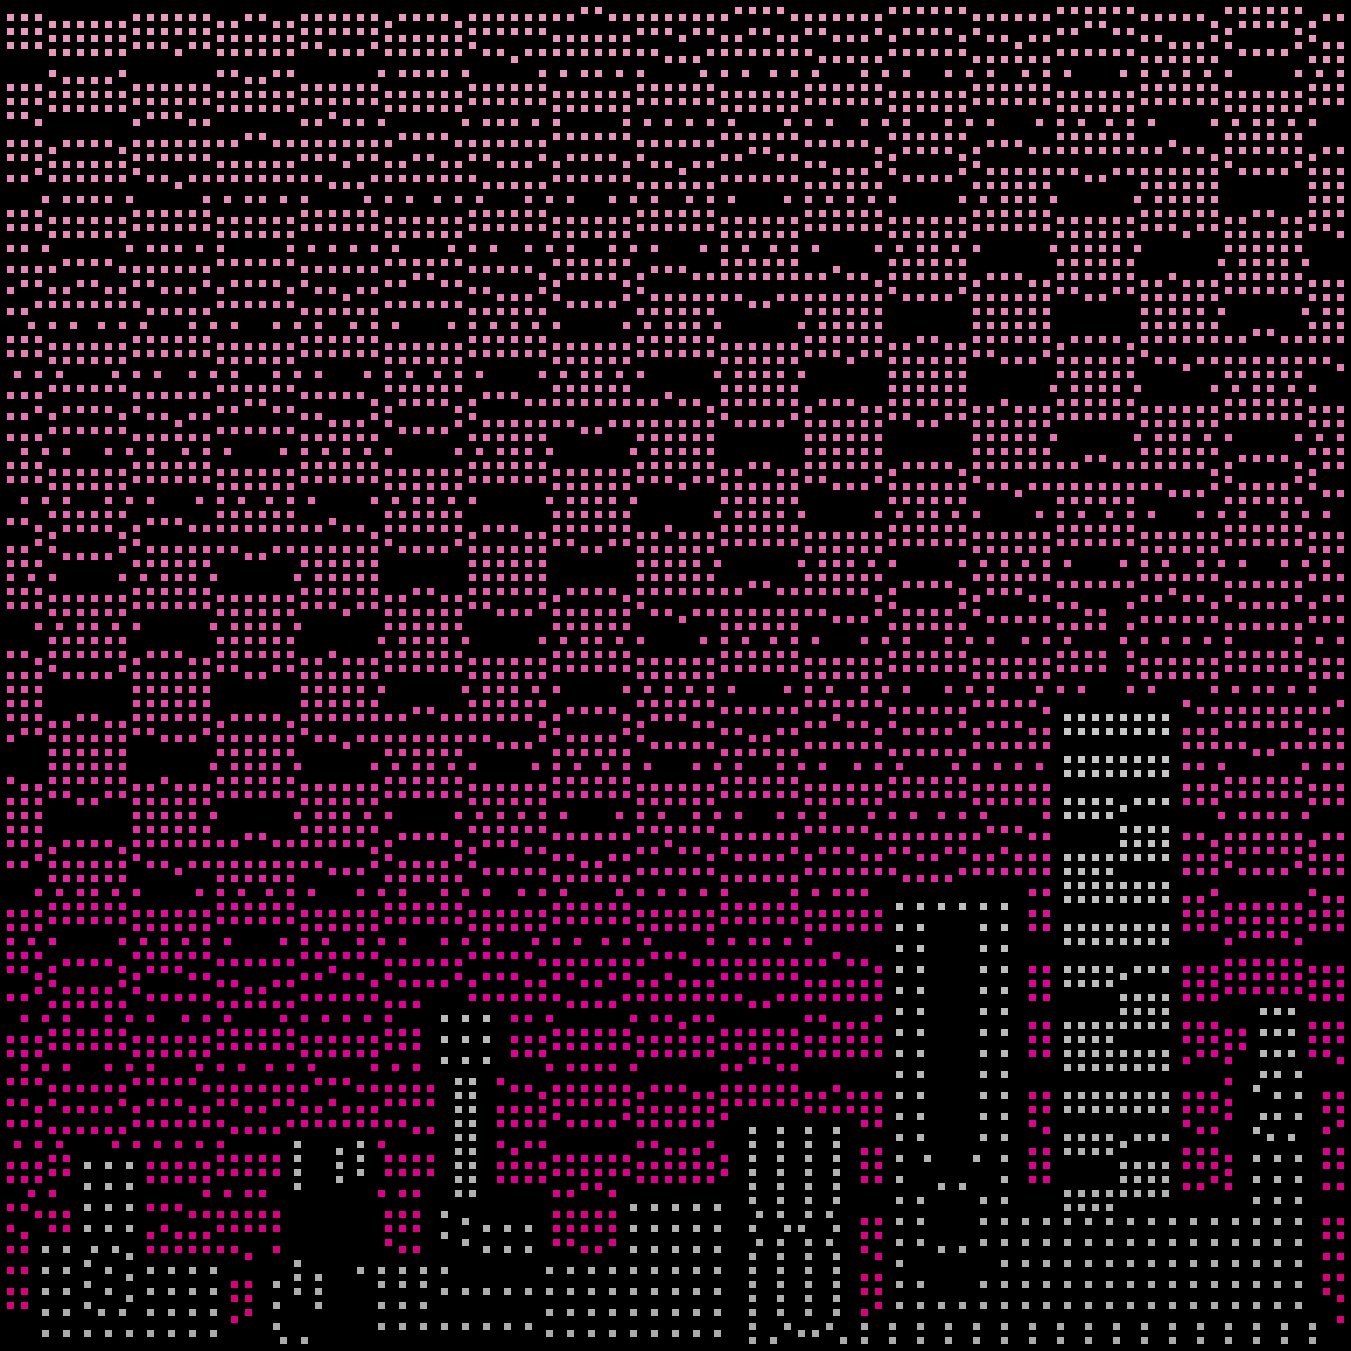 An image of a skyline against the night sky, which is rendered in twinkling purple and black pixels